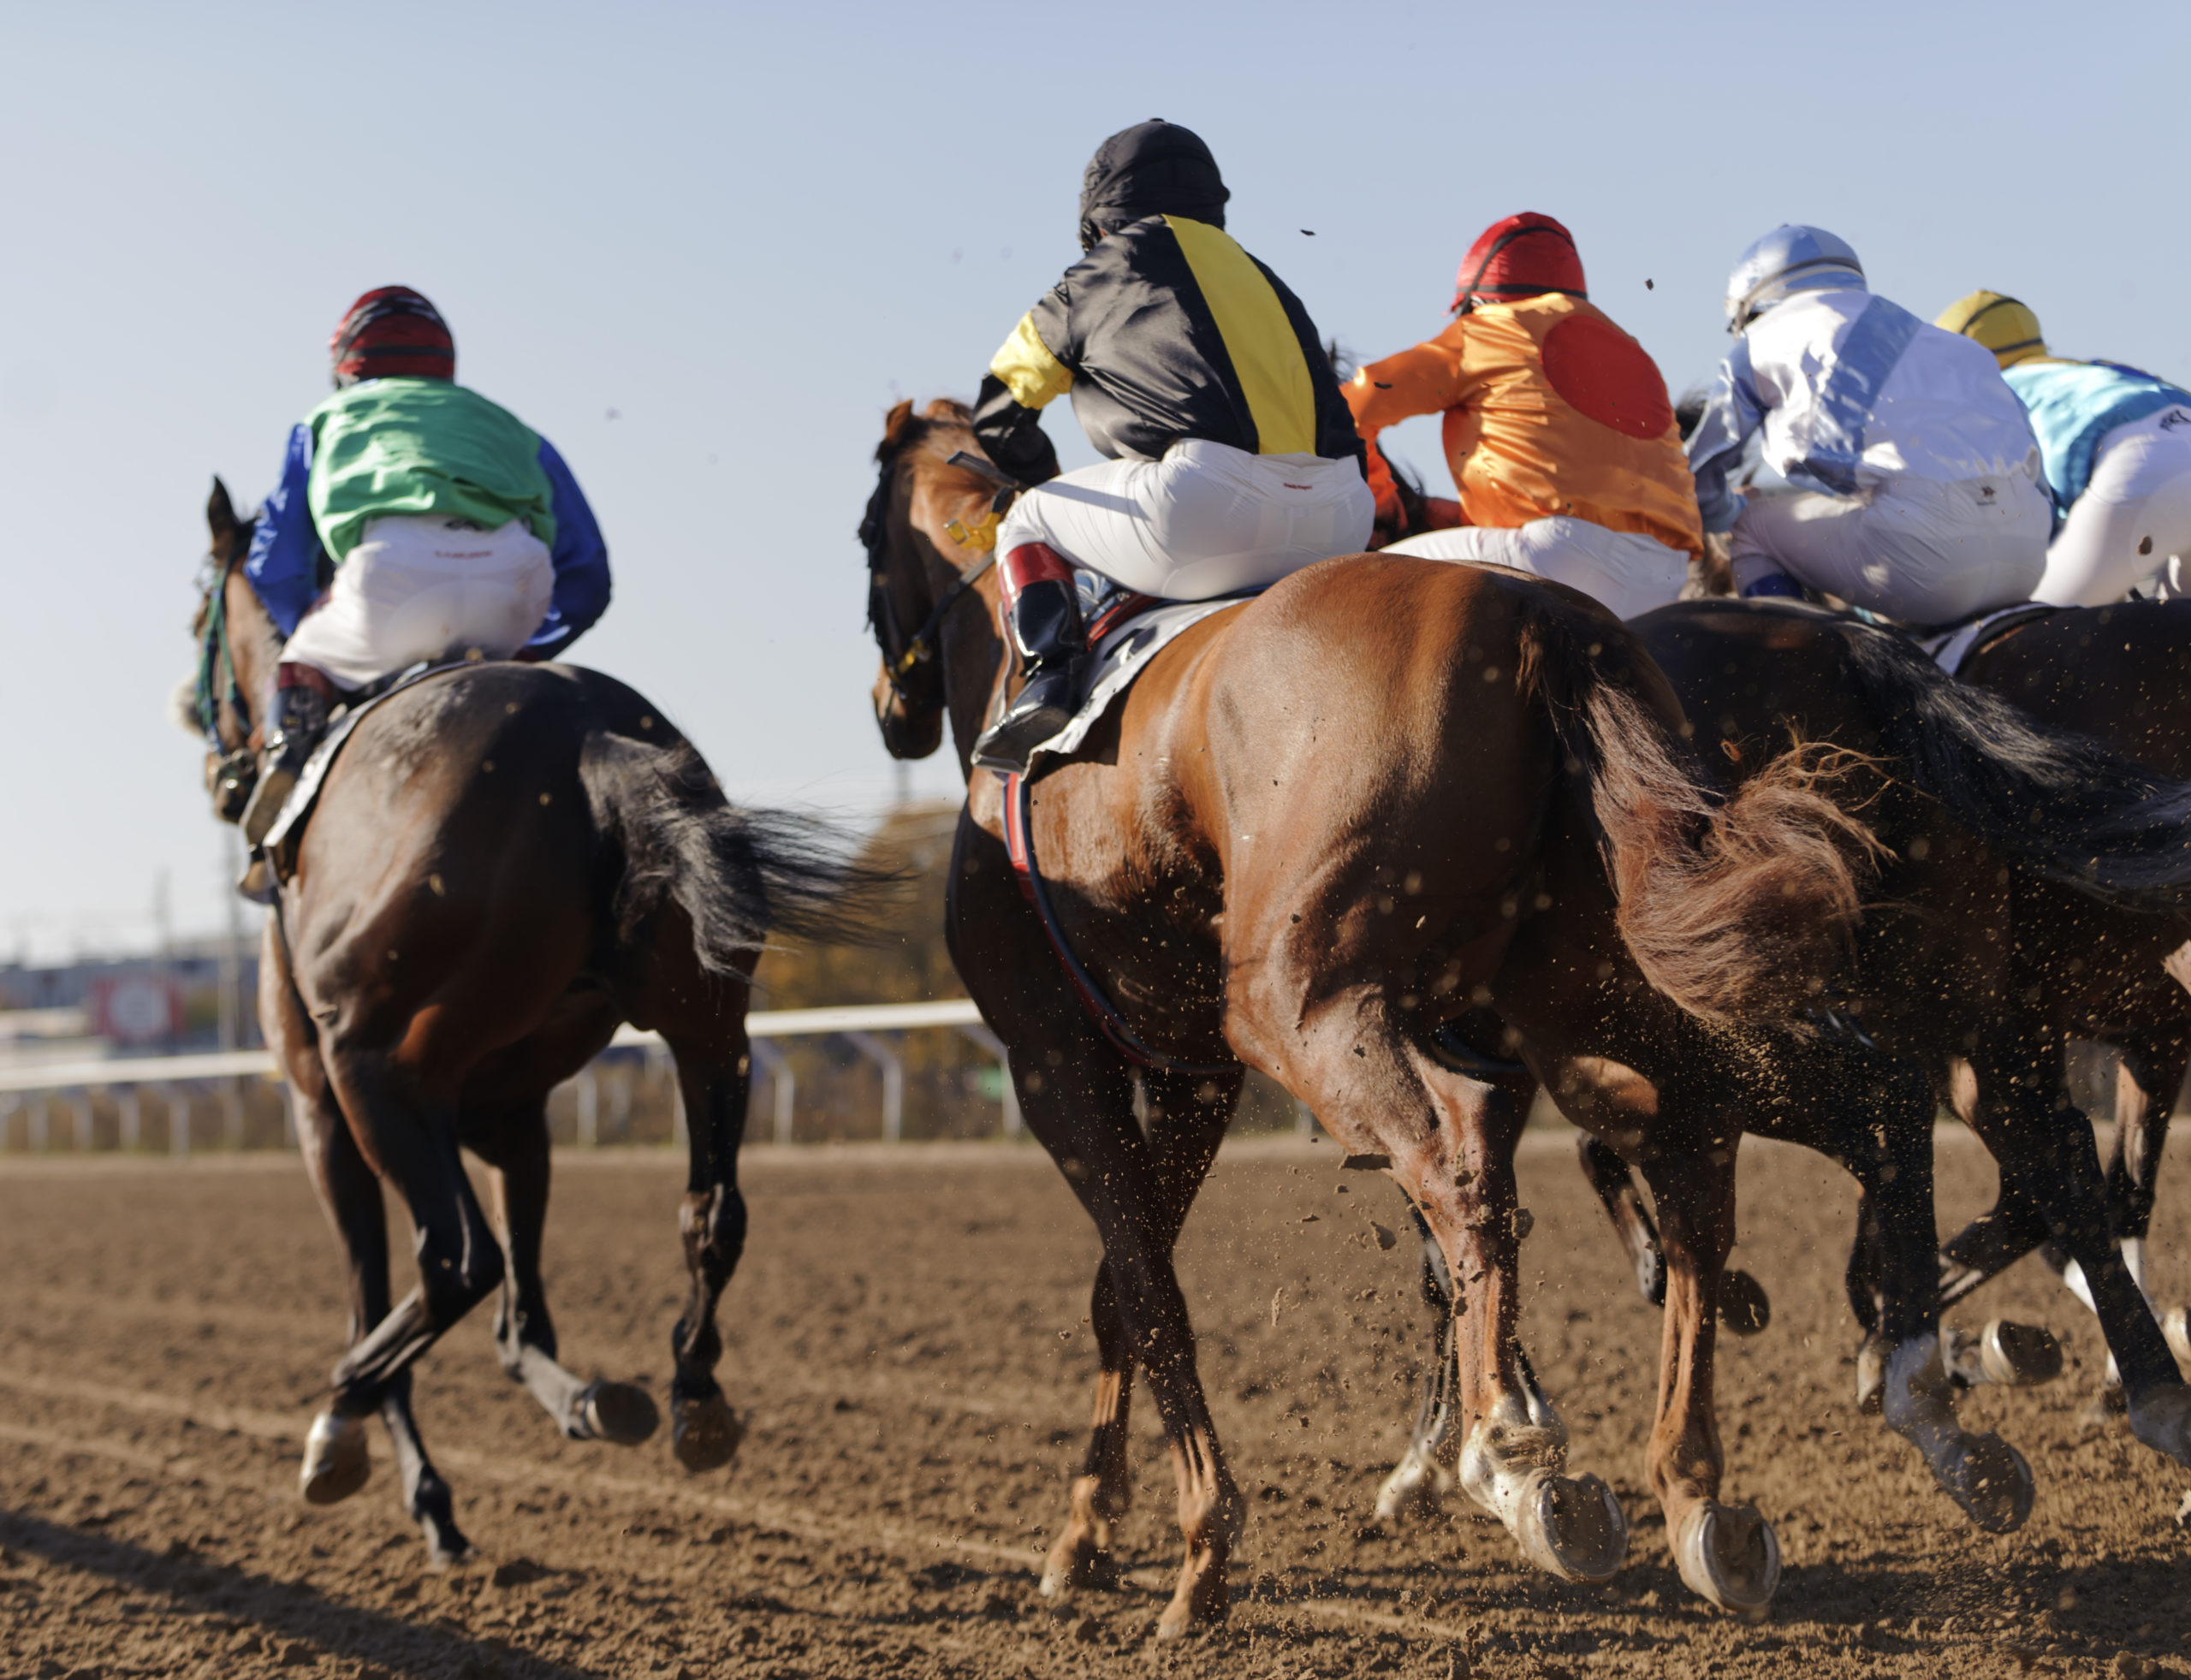 Kentucky Derby Packages - Entertainment LIVEstyle